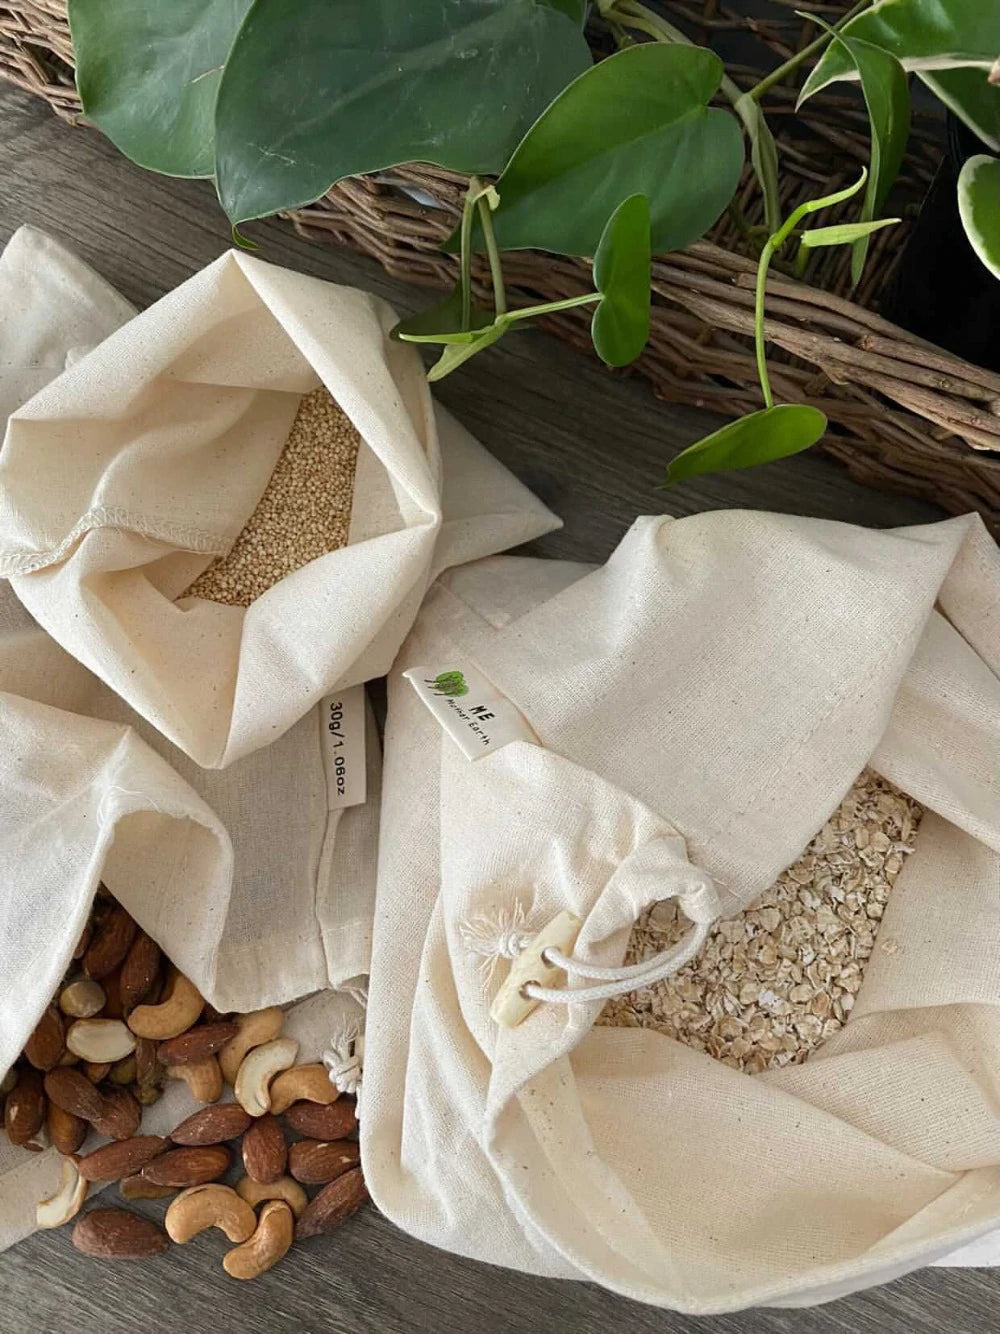 200 Pack Cotton Muslin Bags Sachet Bag Multipurpose Drawstring Bags for Tea  Jewelry Wedding Party Favors Storage (4 x 6 Inches) - Walmart.com